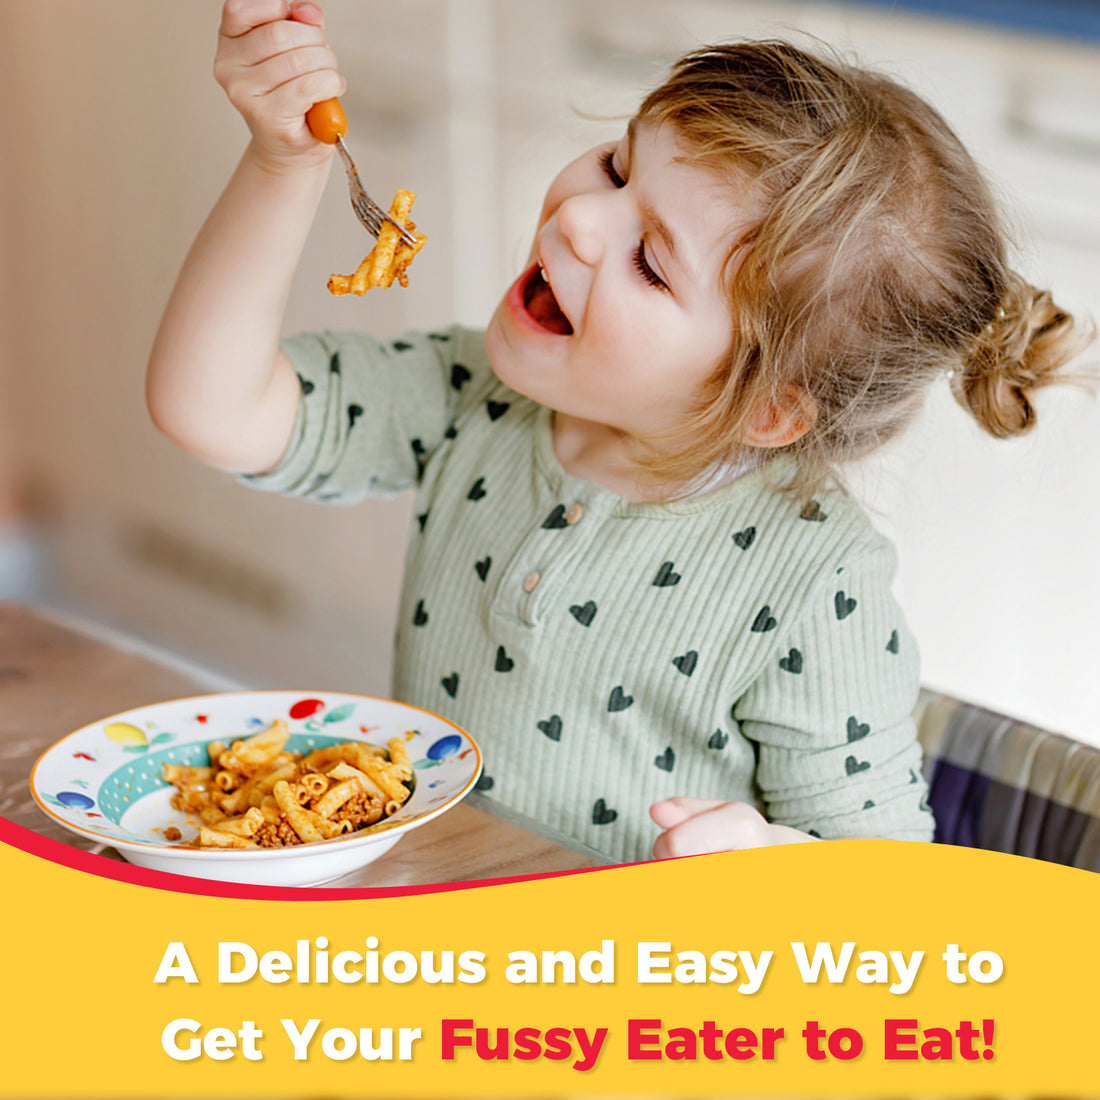 Help your kids eat more!